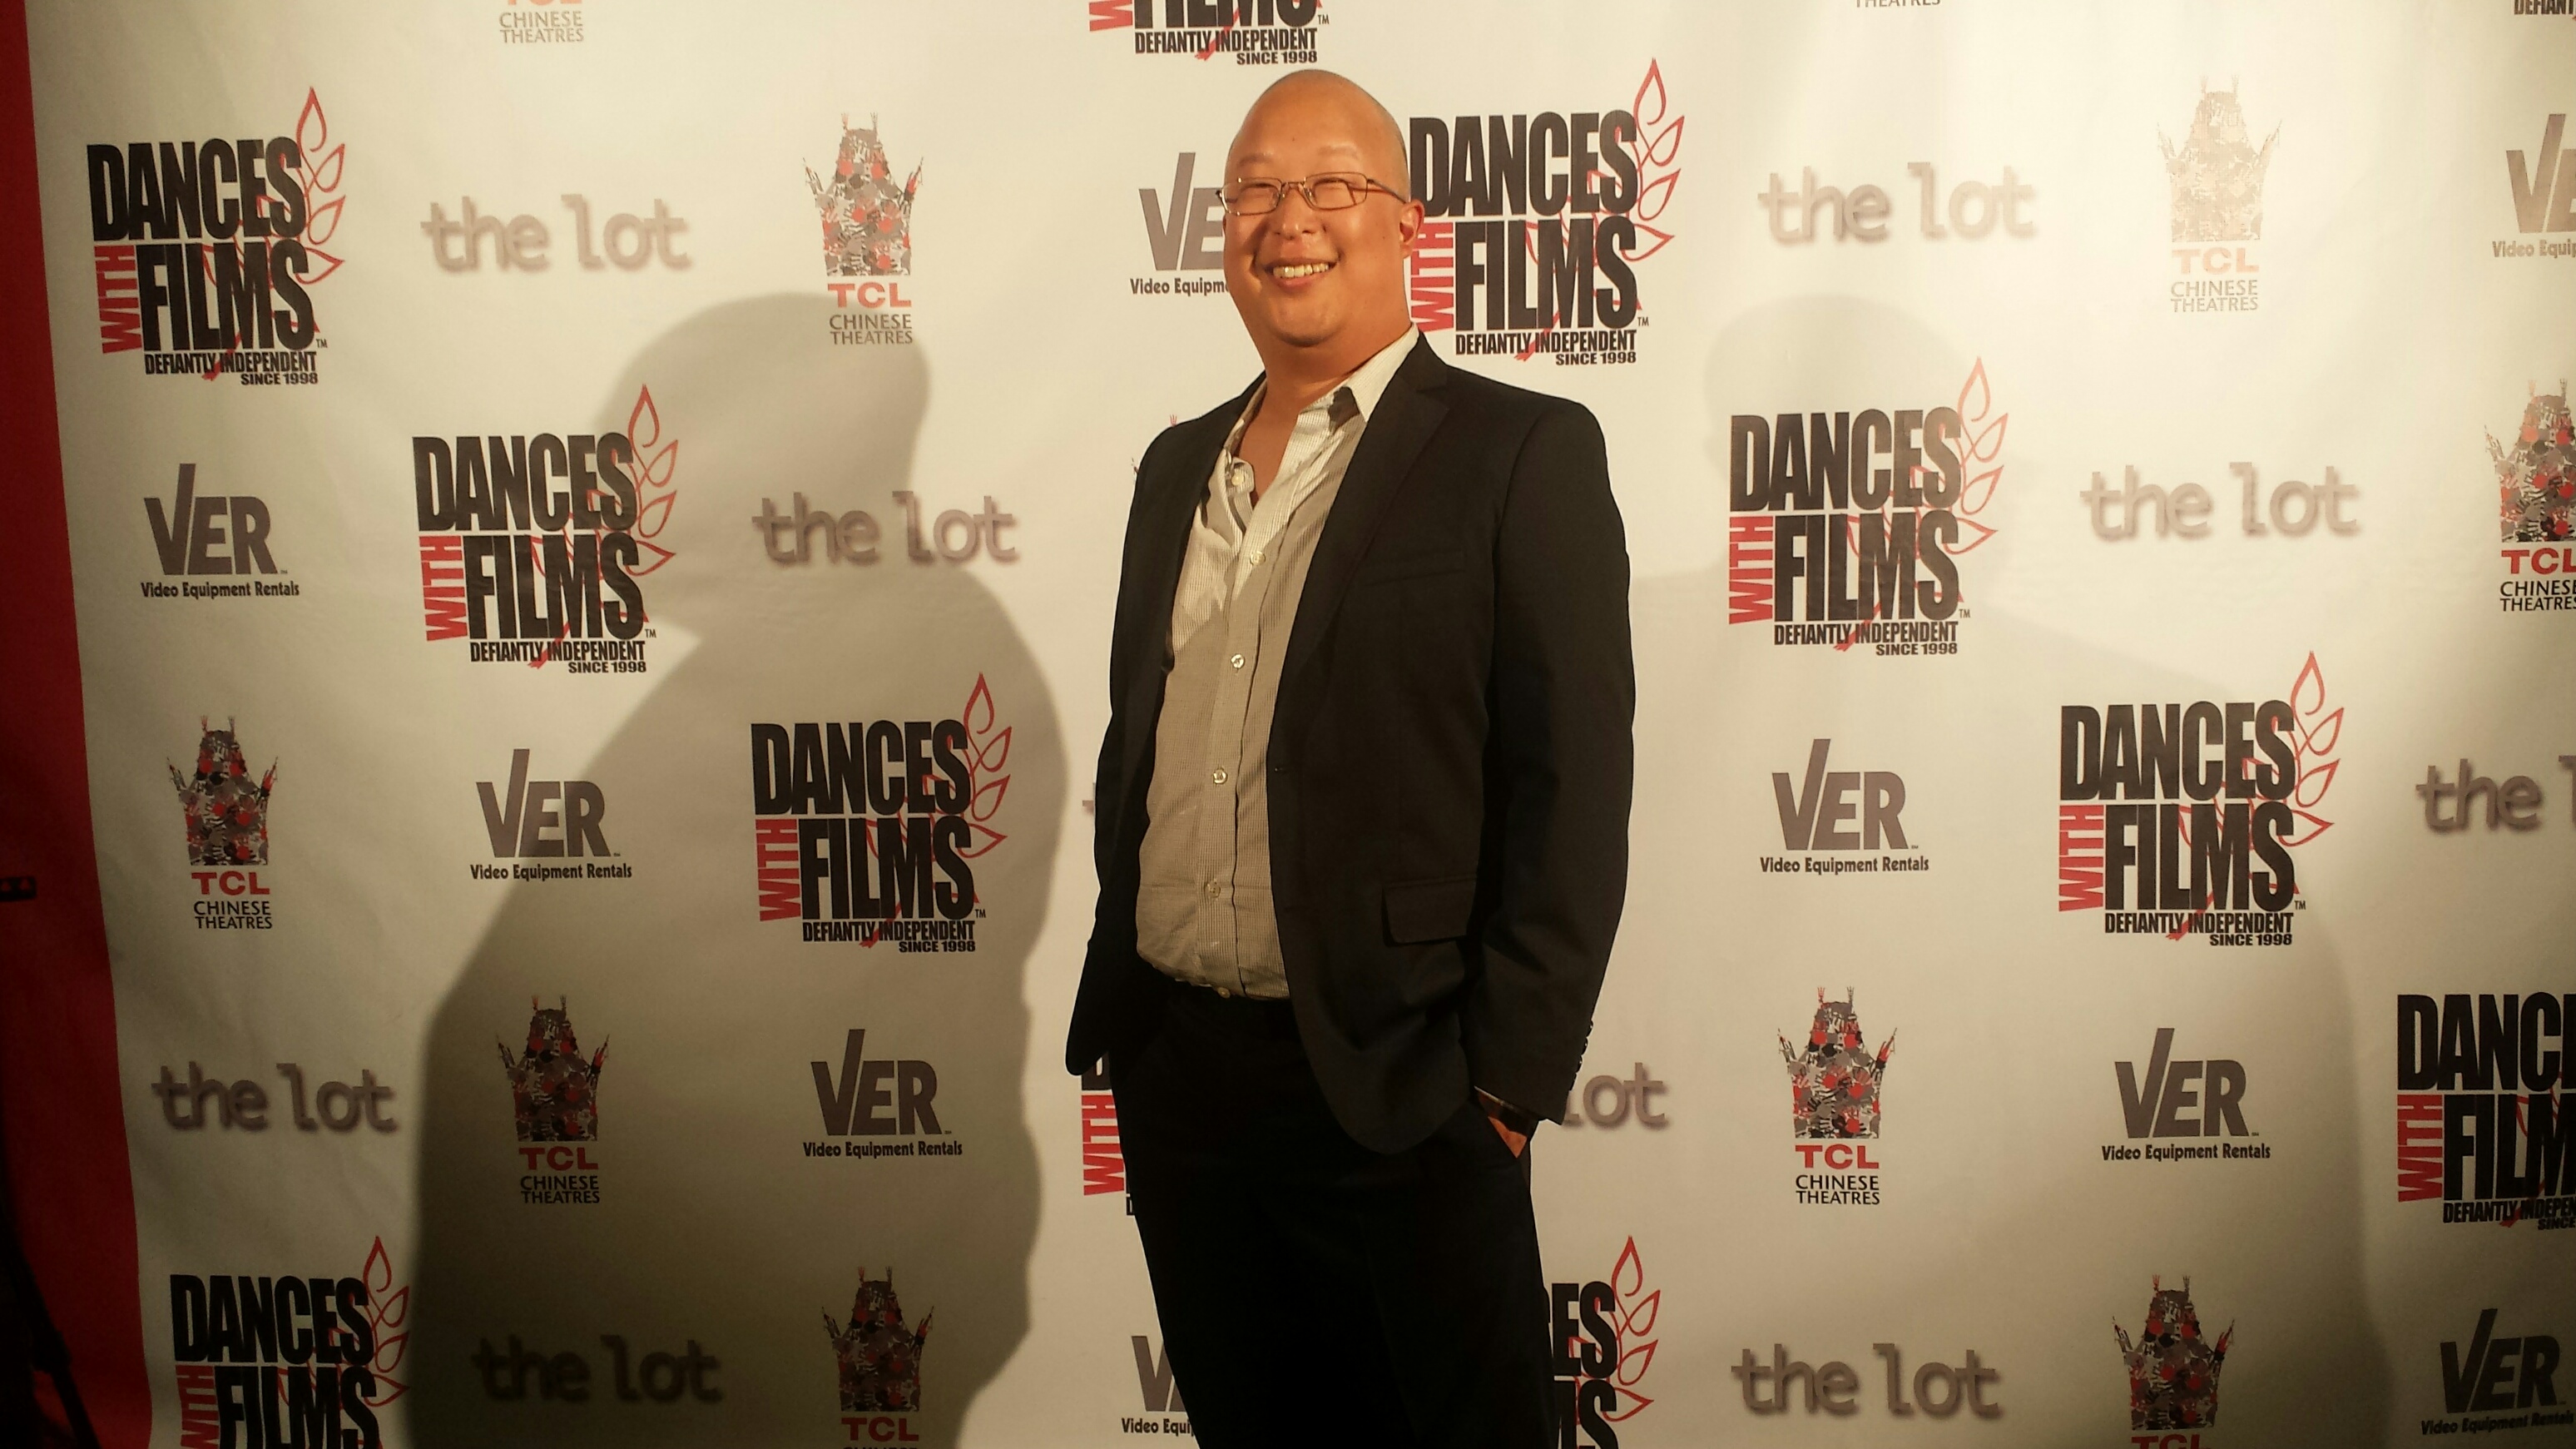 At the Dances with Film Festival